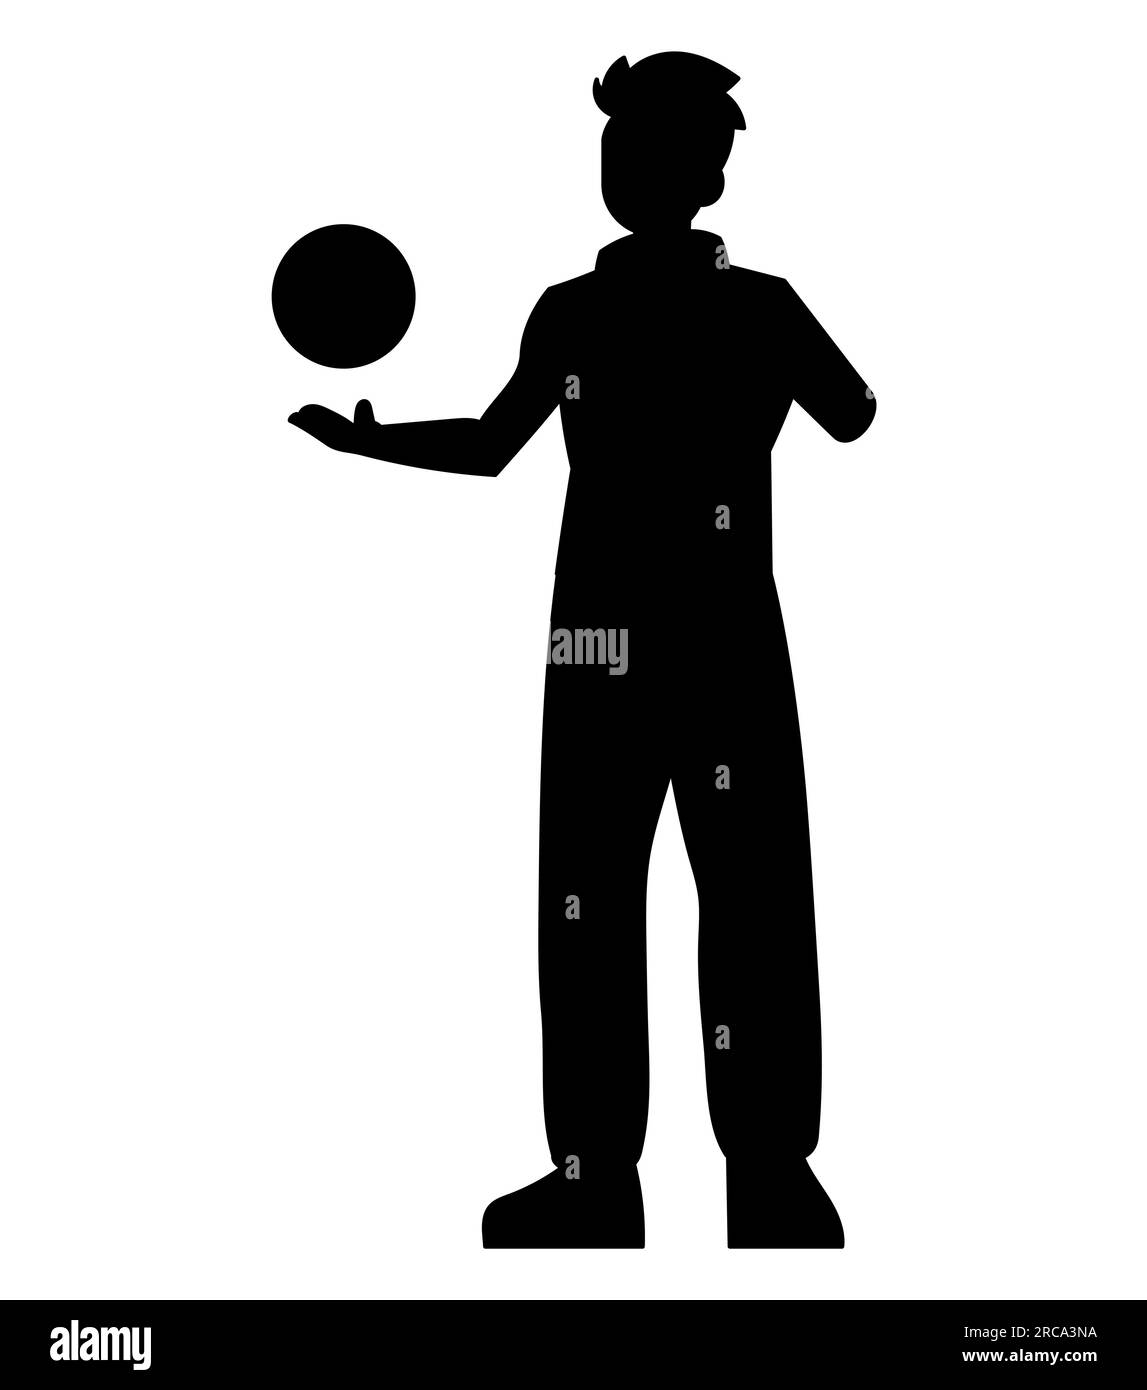 Black silhouette of a teenage boy playing with a ball, basketball player, game icon, vector illustration isolated on white background Stock Vector